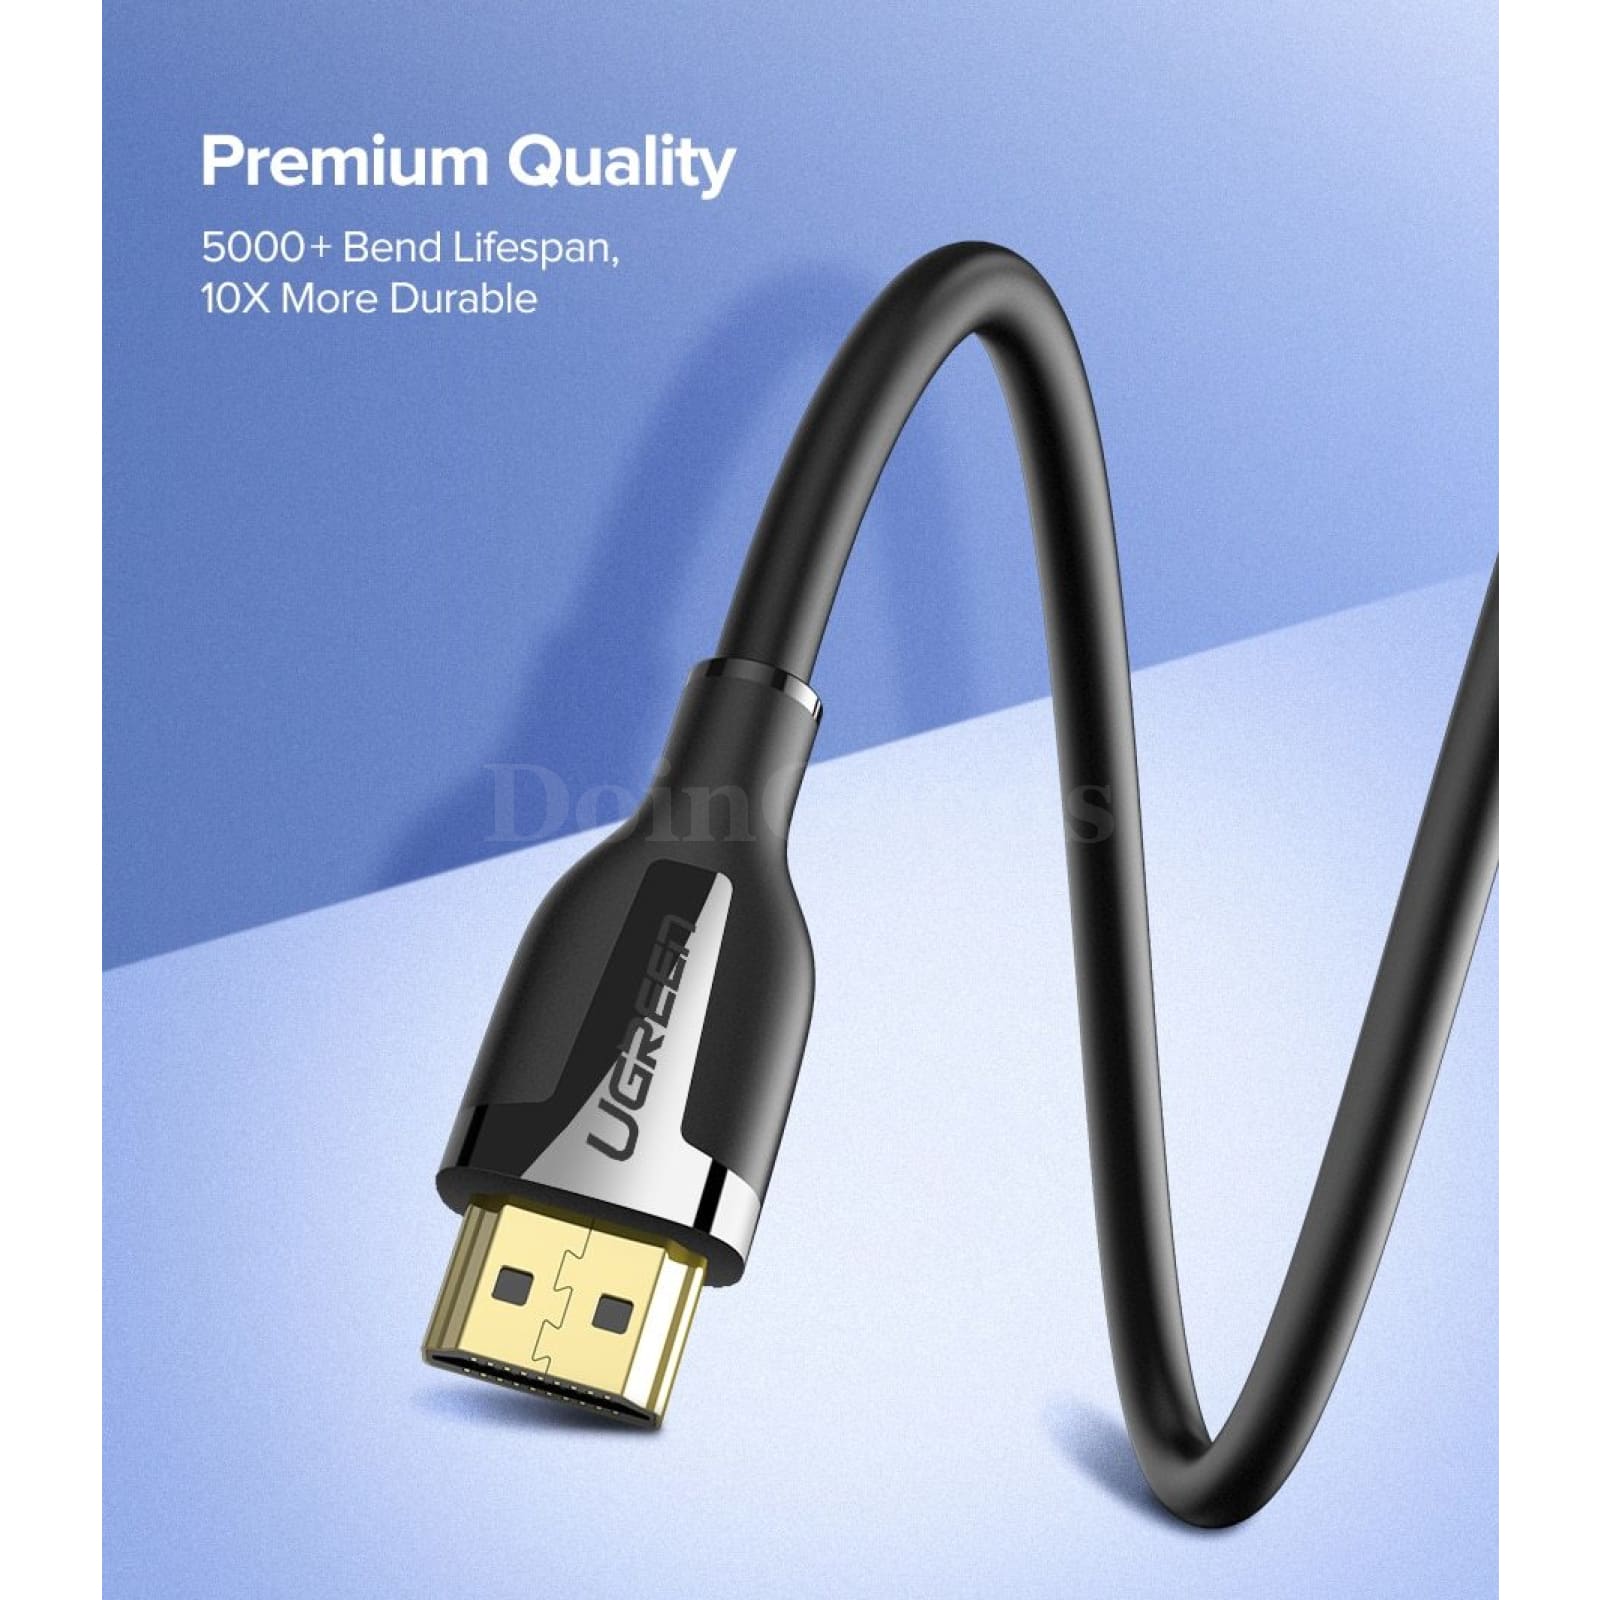 Ugreen High Quality Hdmi Cable Angle 90 Degree 8Ft 4K Speed Gold Plated 3Ft 301635